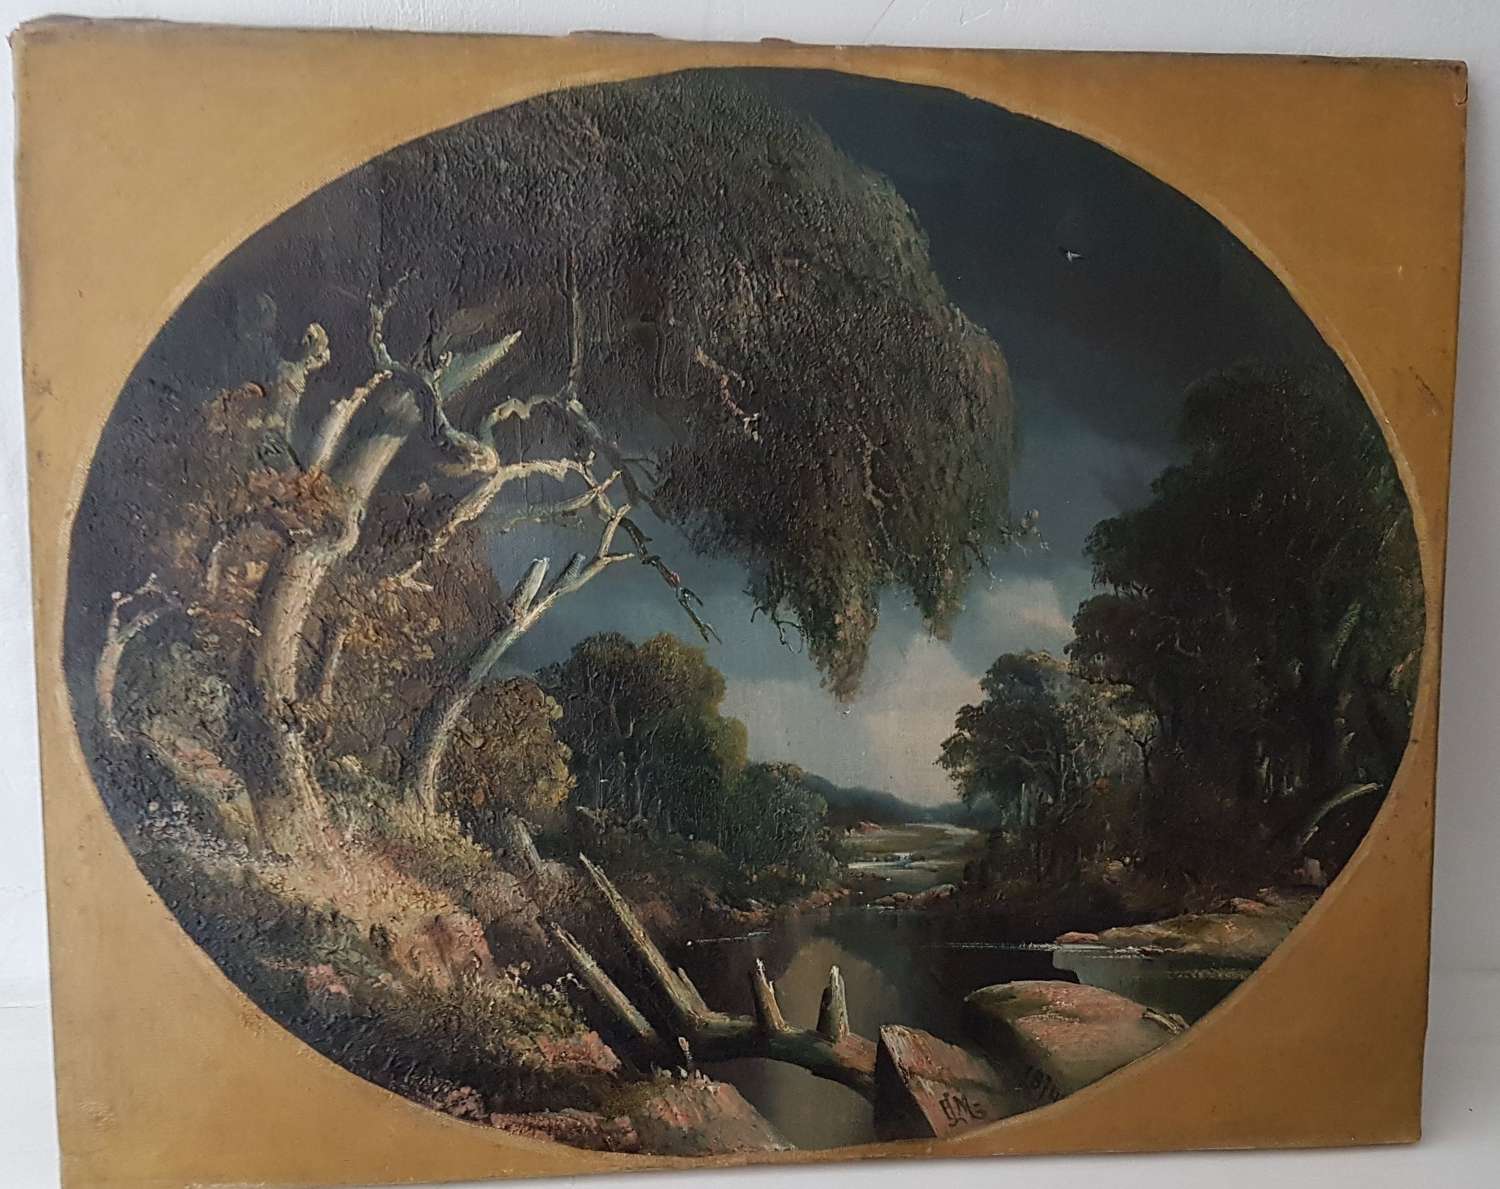 Fearnleigh Montague oil on canvas of Woronora Creek, New South Wales